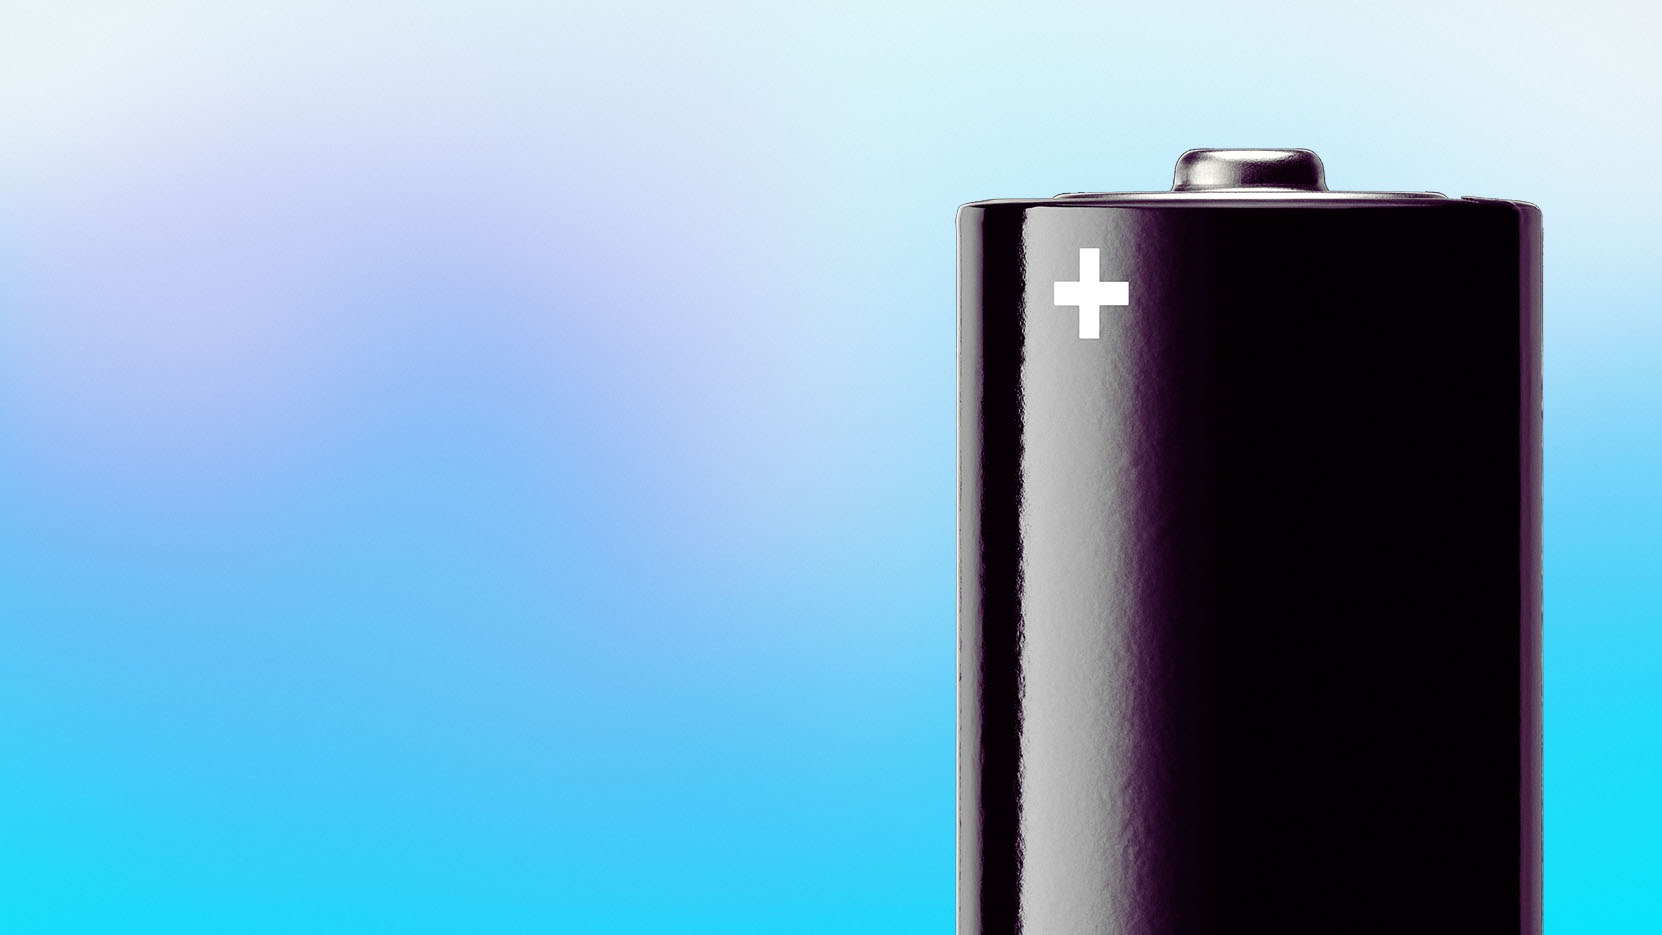 BUILDING THE BATTERY ECOSYSTEM OF TOMORROW